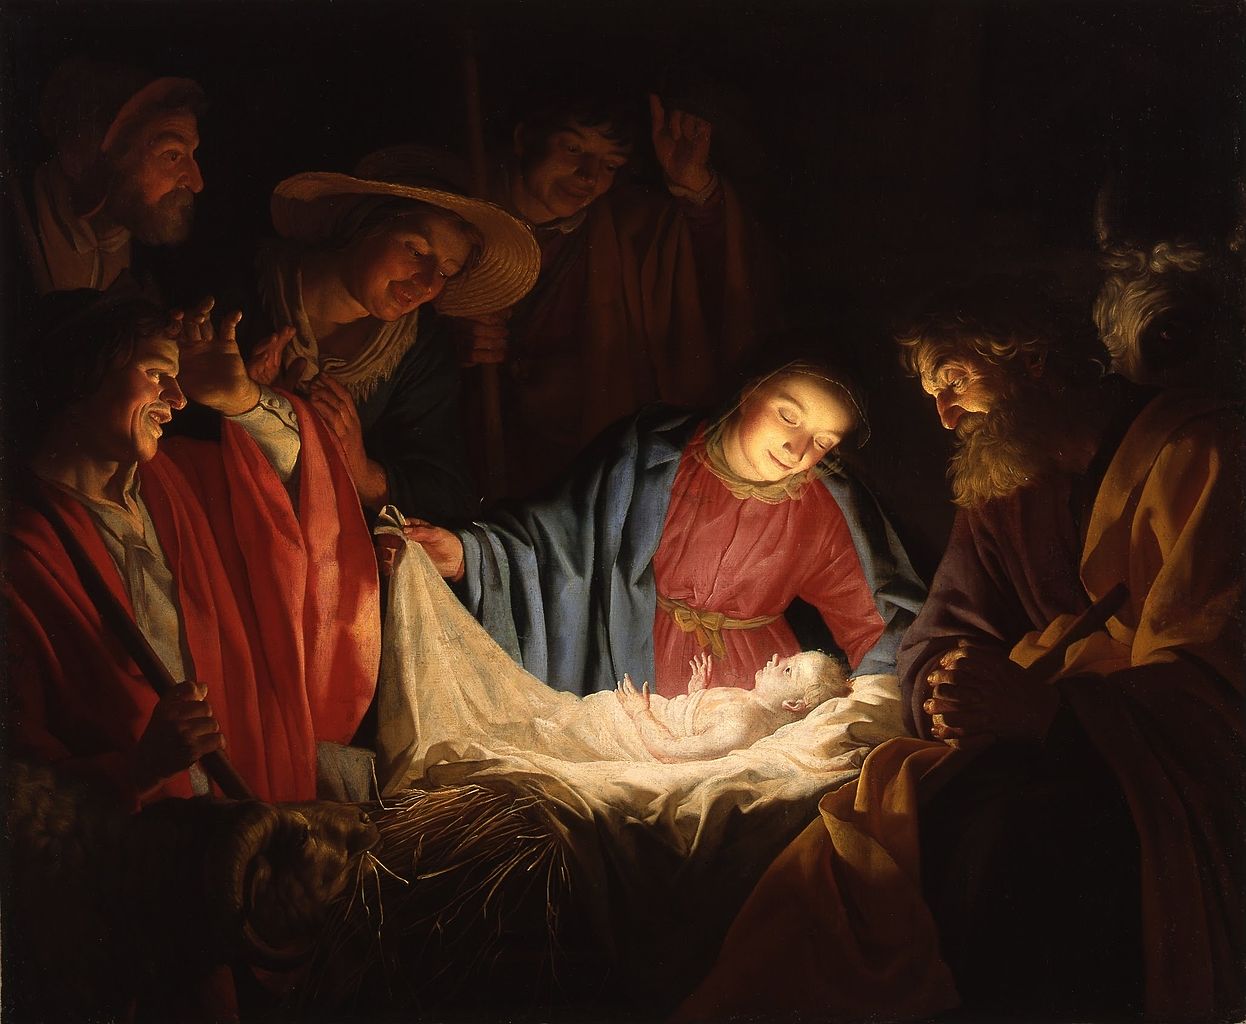 The King in a manger